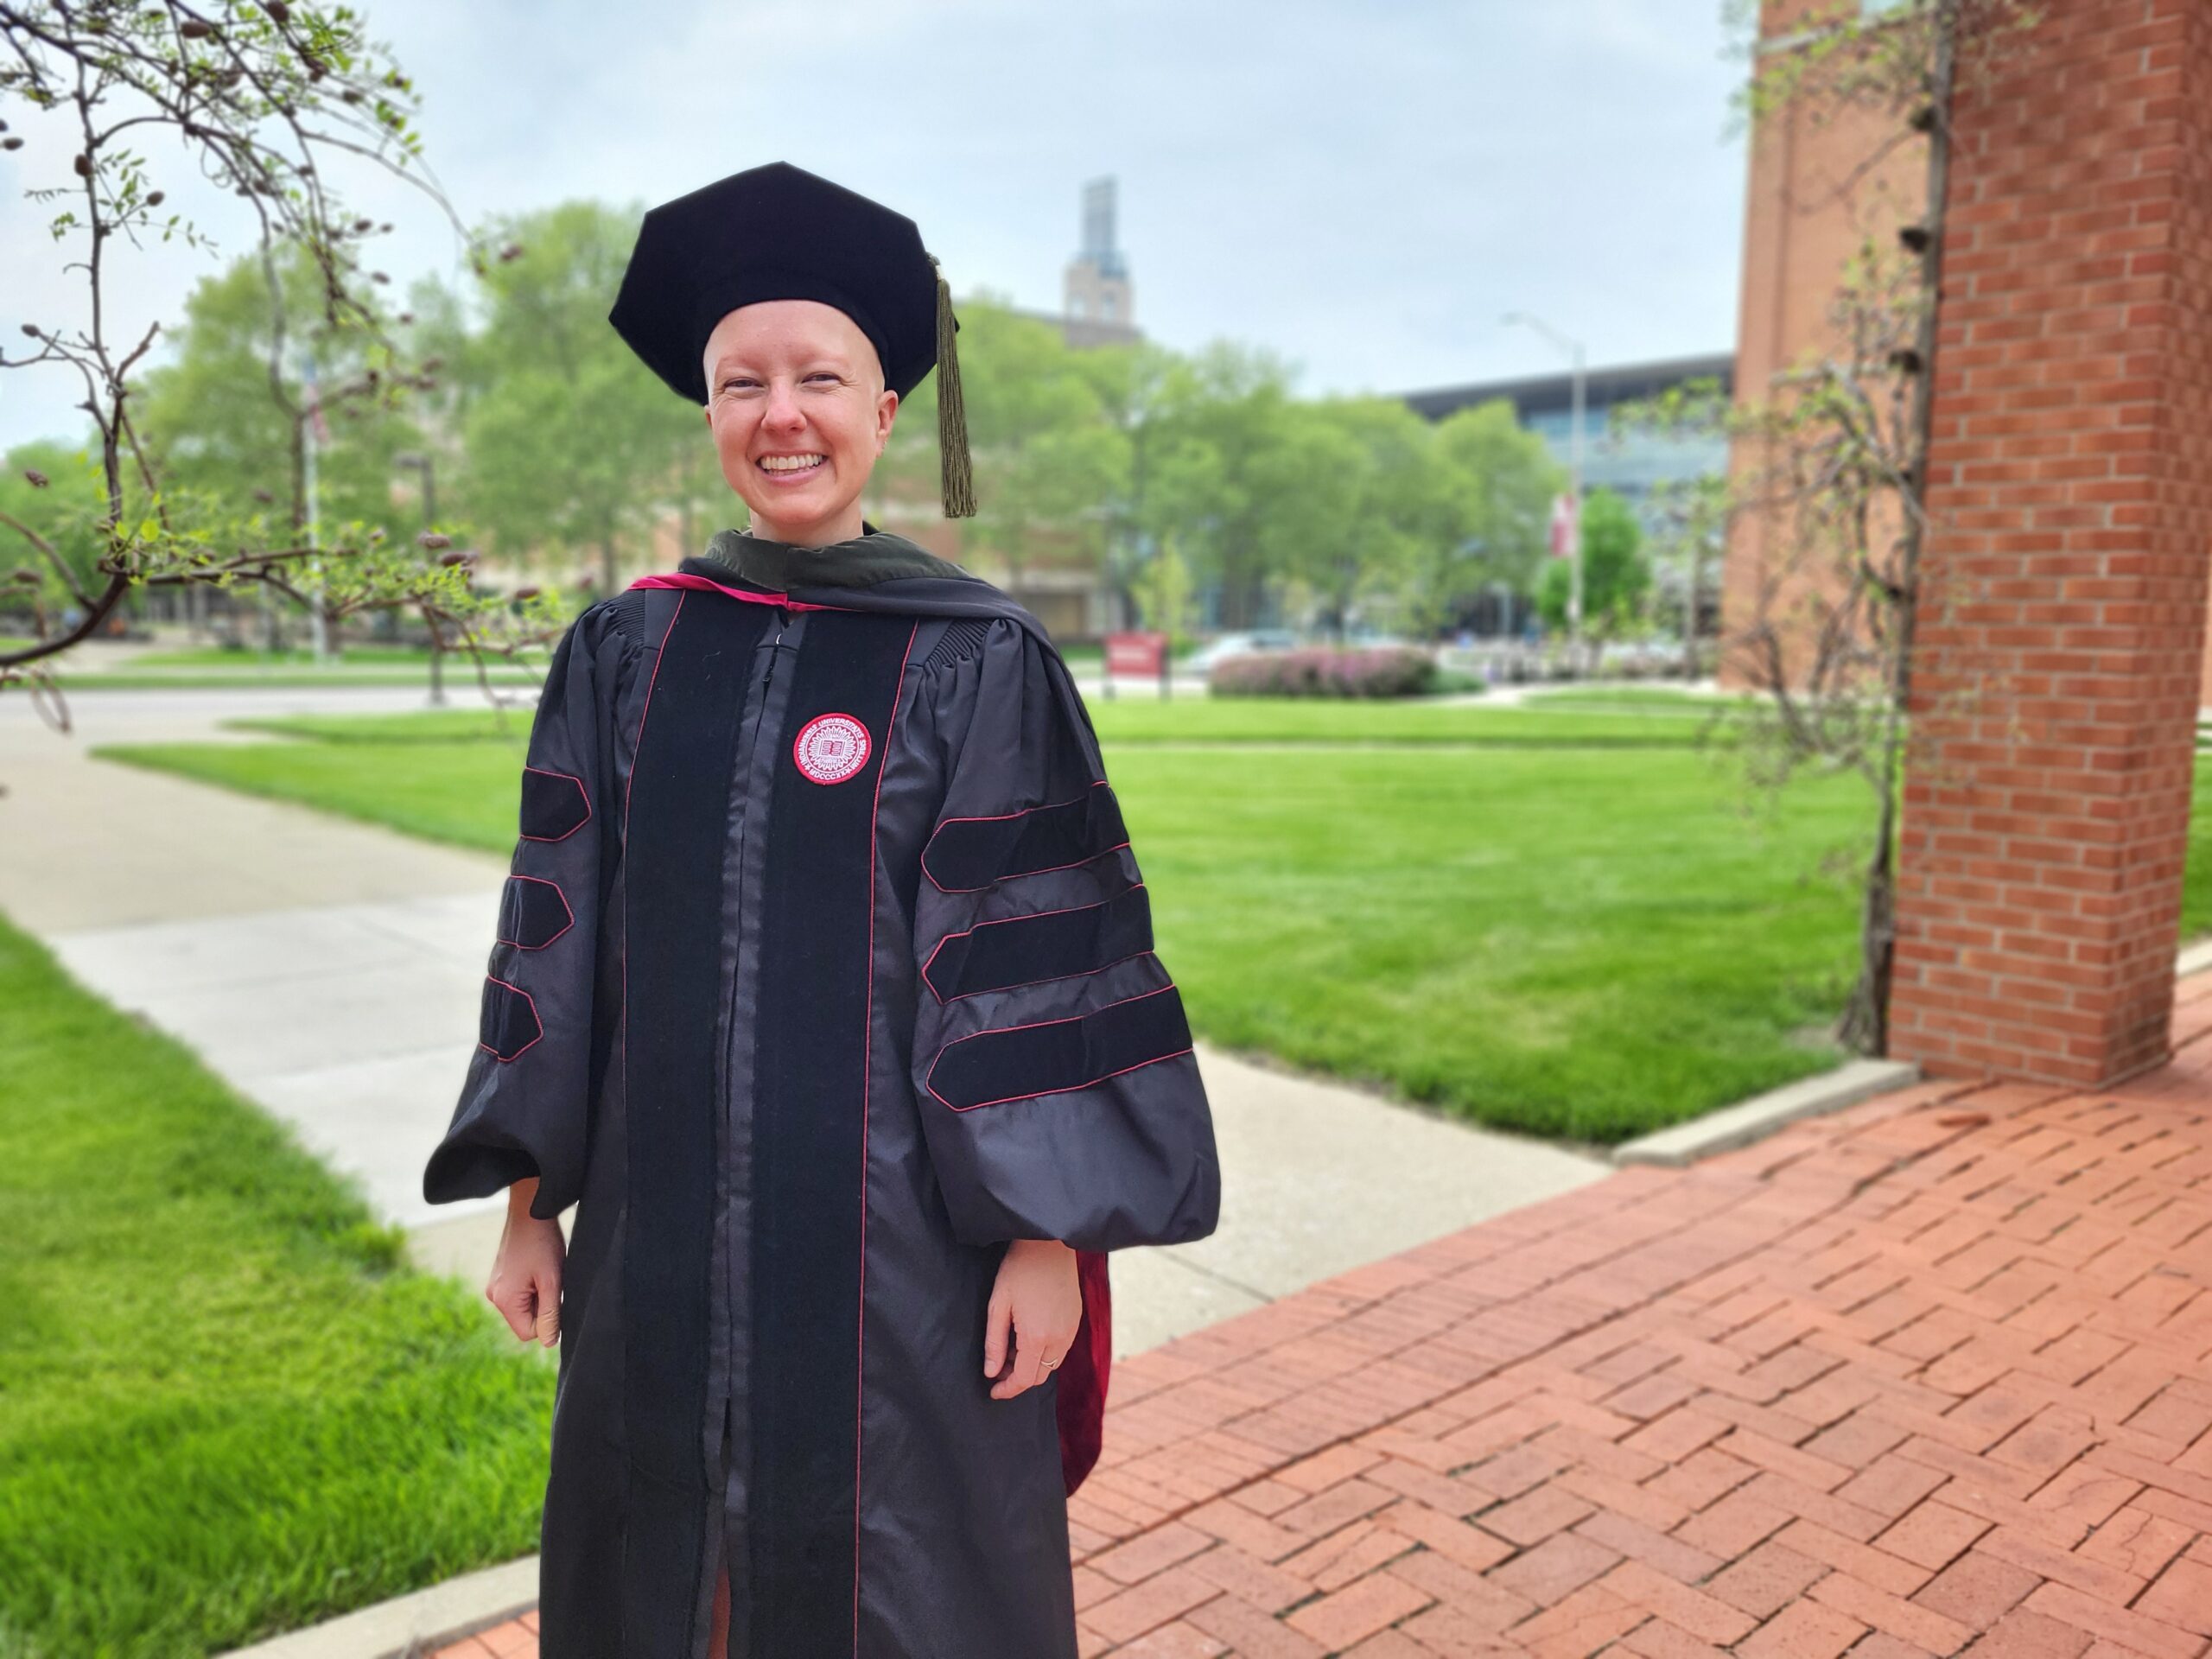 A young person wearing doctoral graduation regalia, smiling